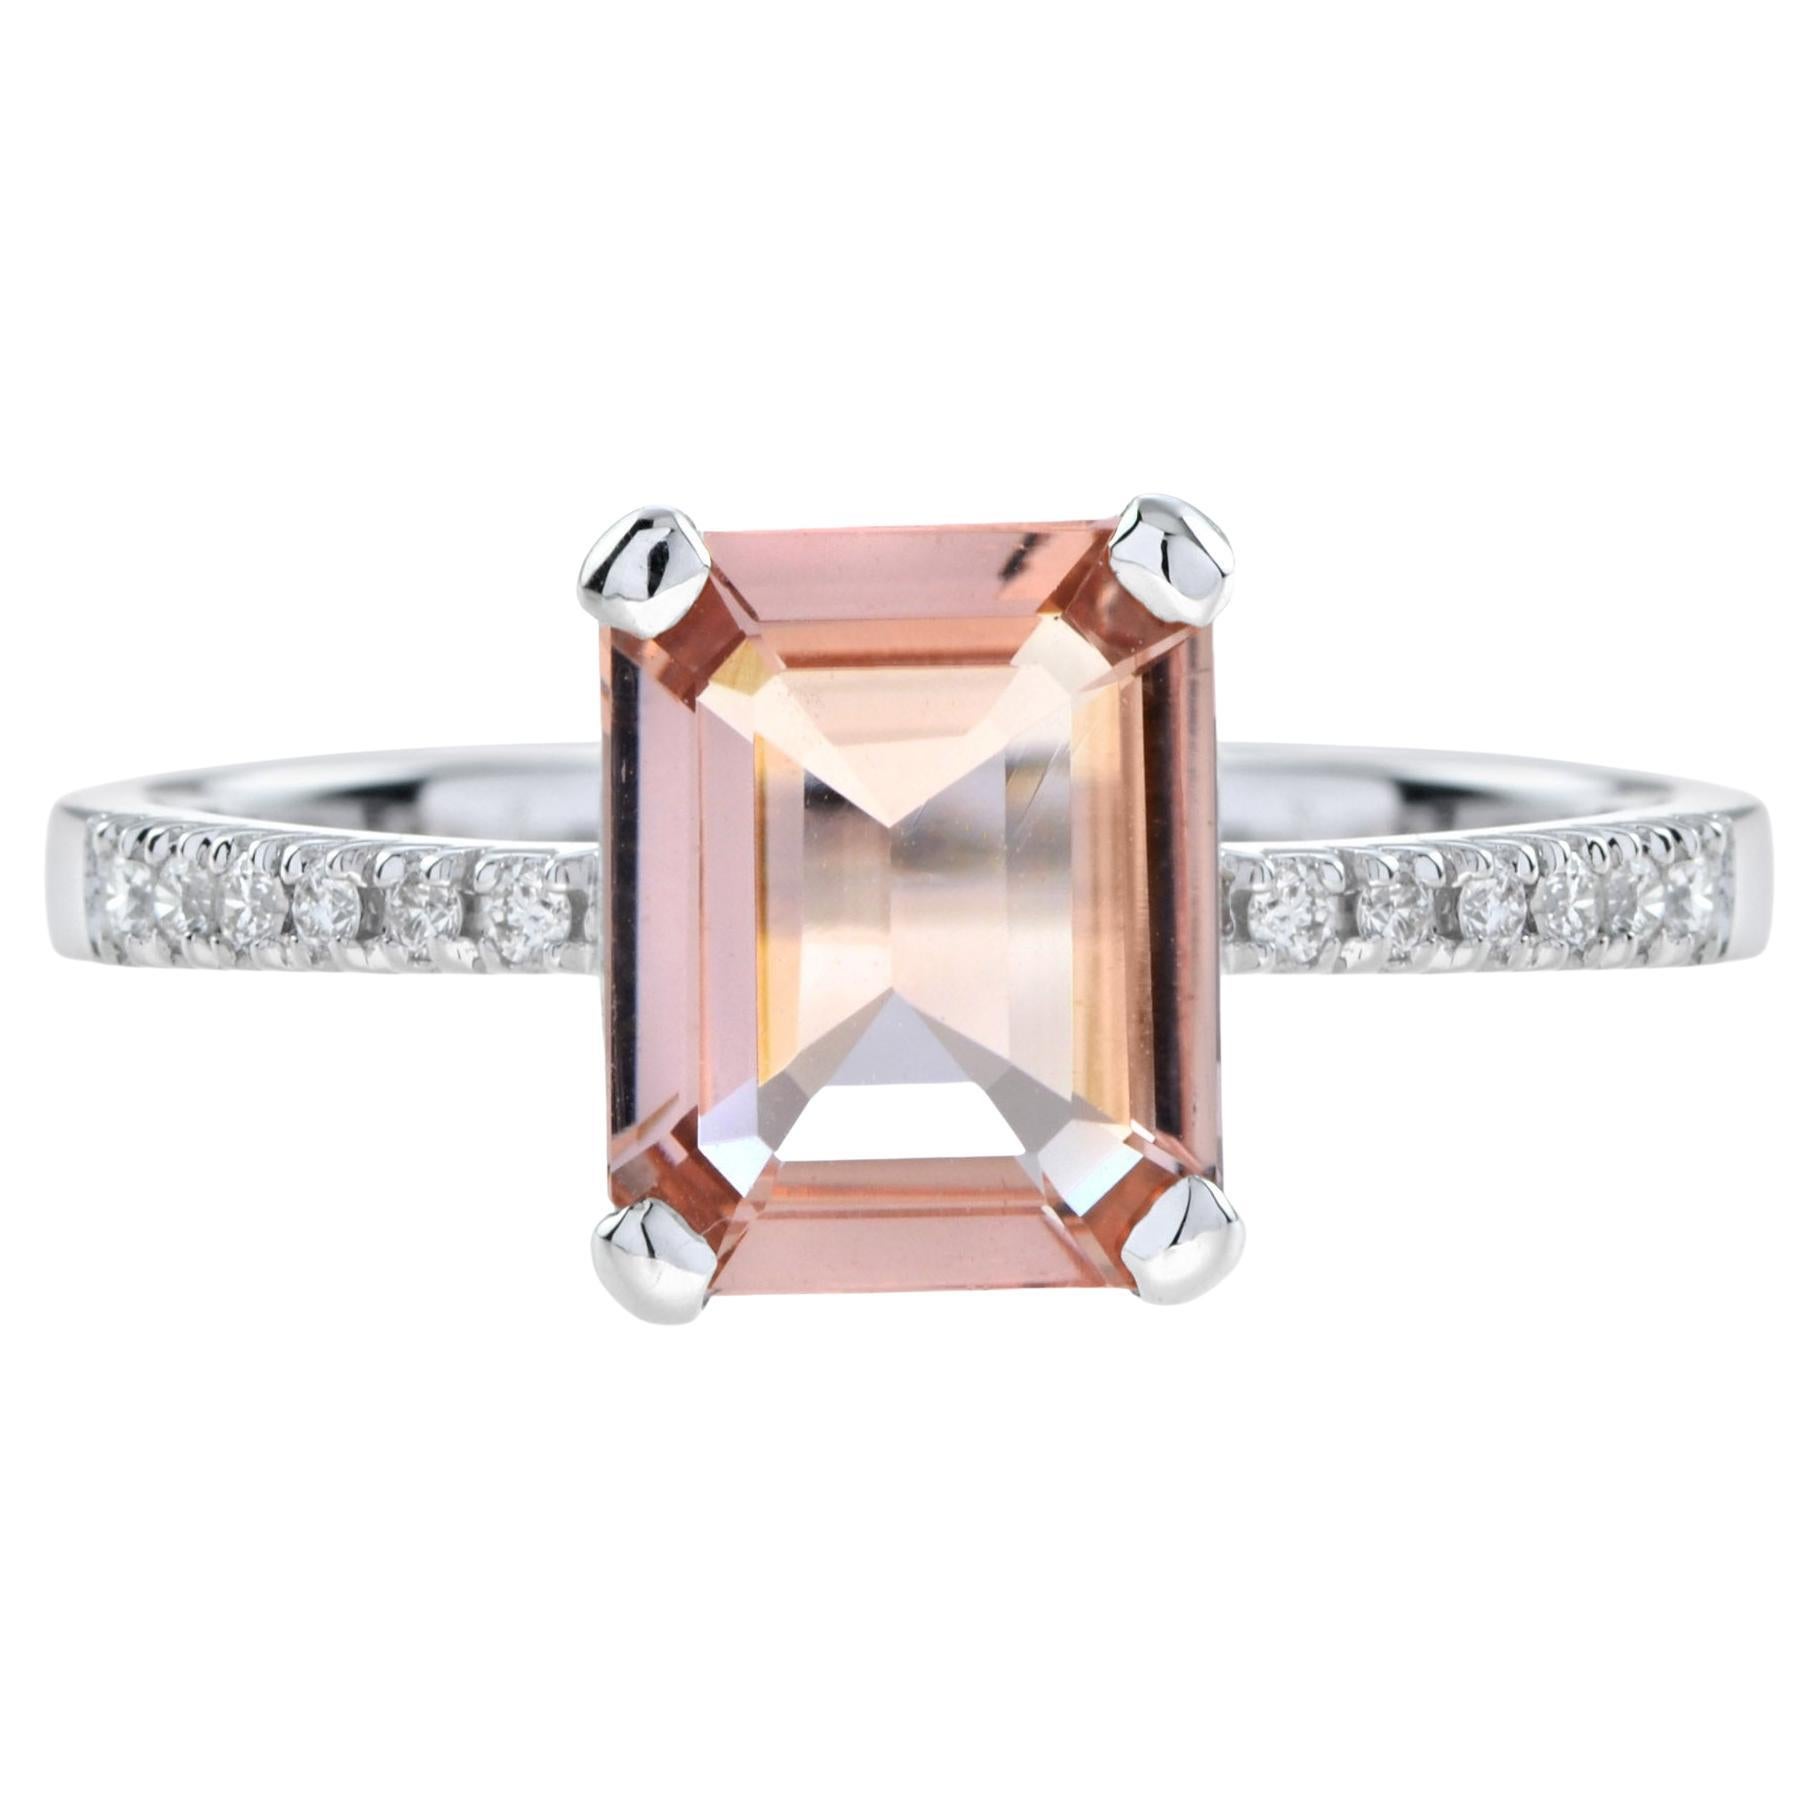 Emerald Cut Morganite with Diamond Engagement Ring in 18K White Gold